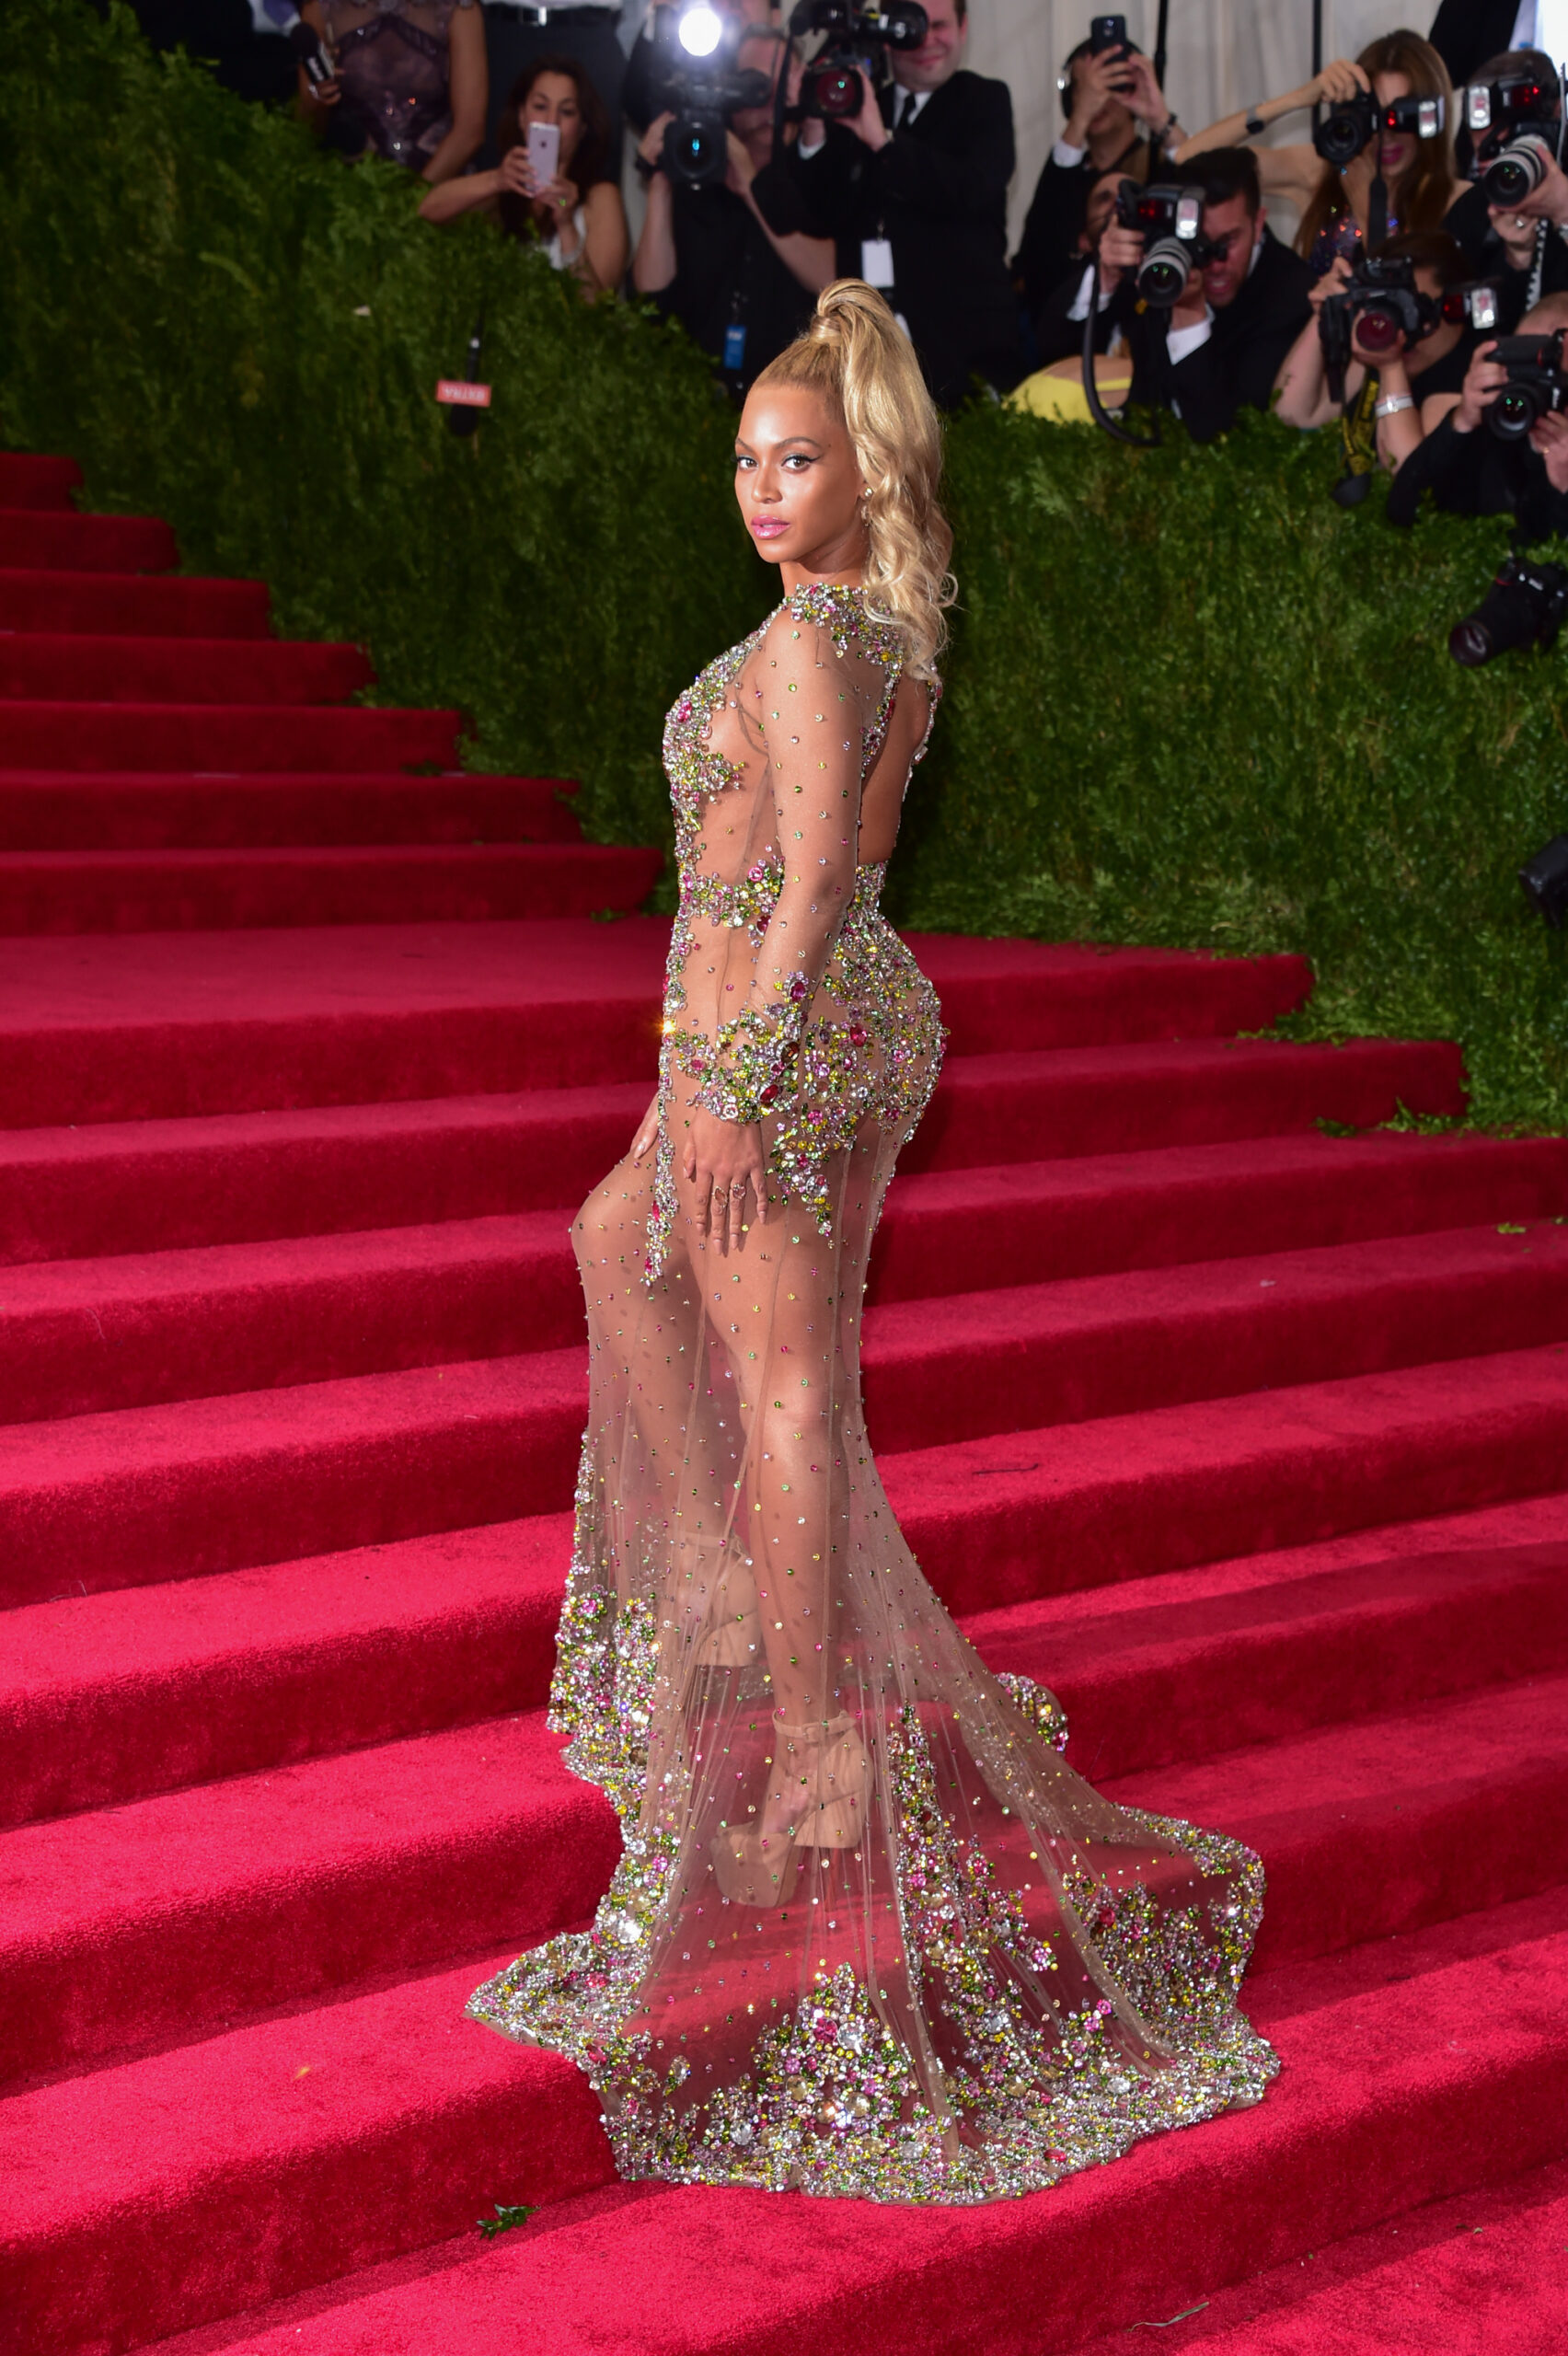 Beyonce on the red carpet, photographed by George Pimentel.